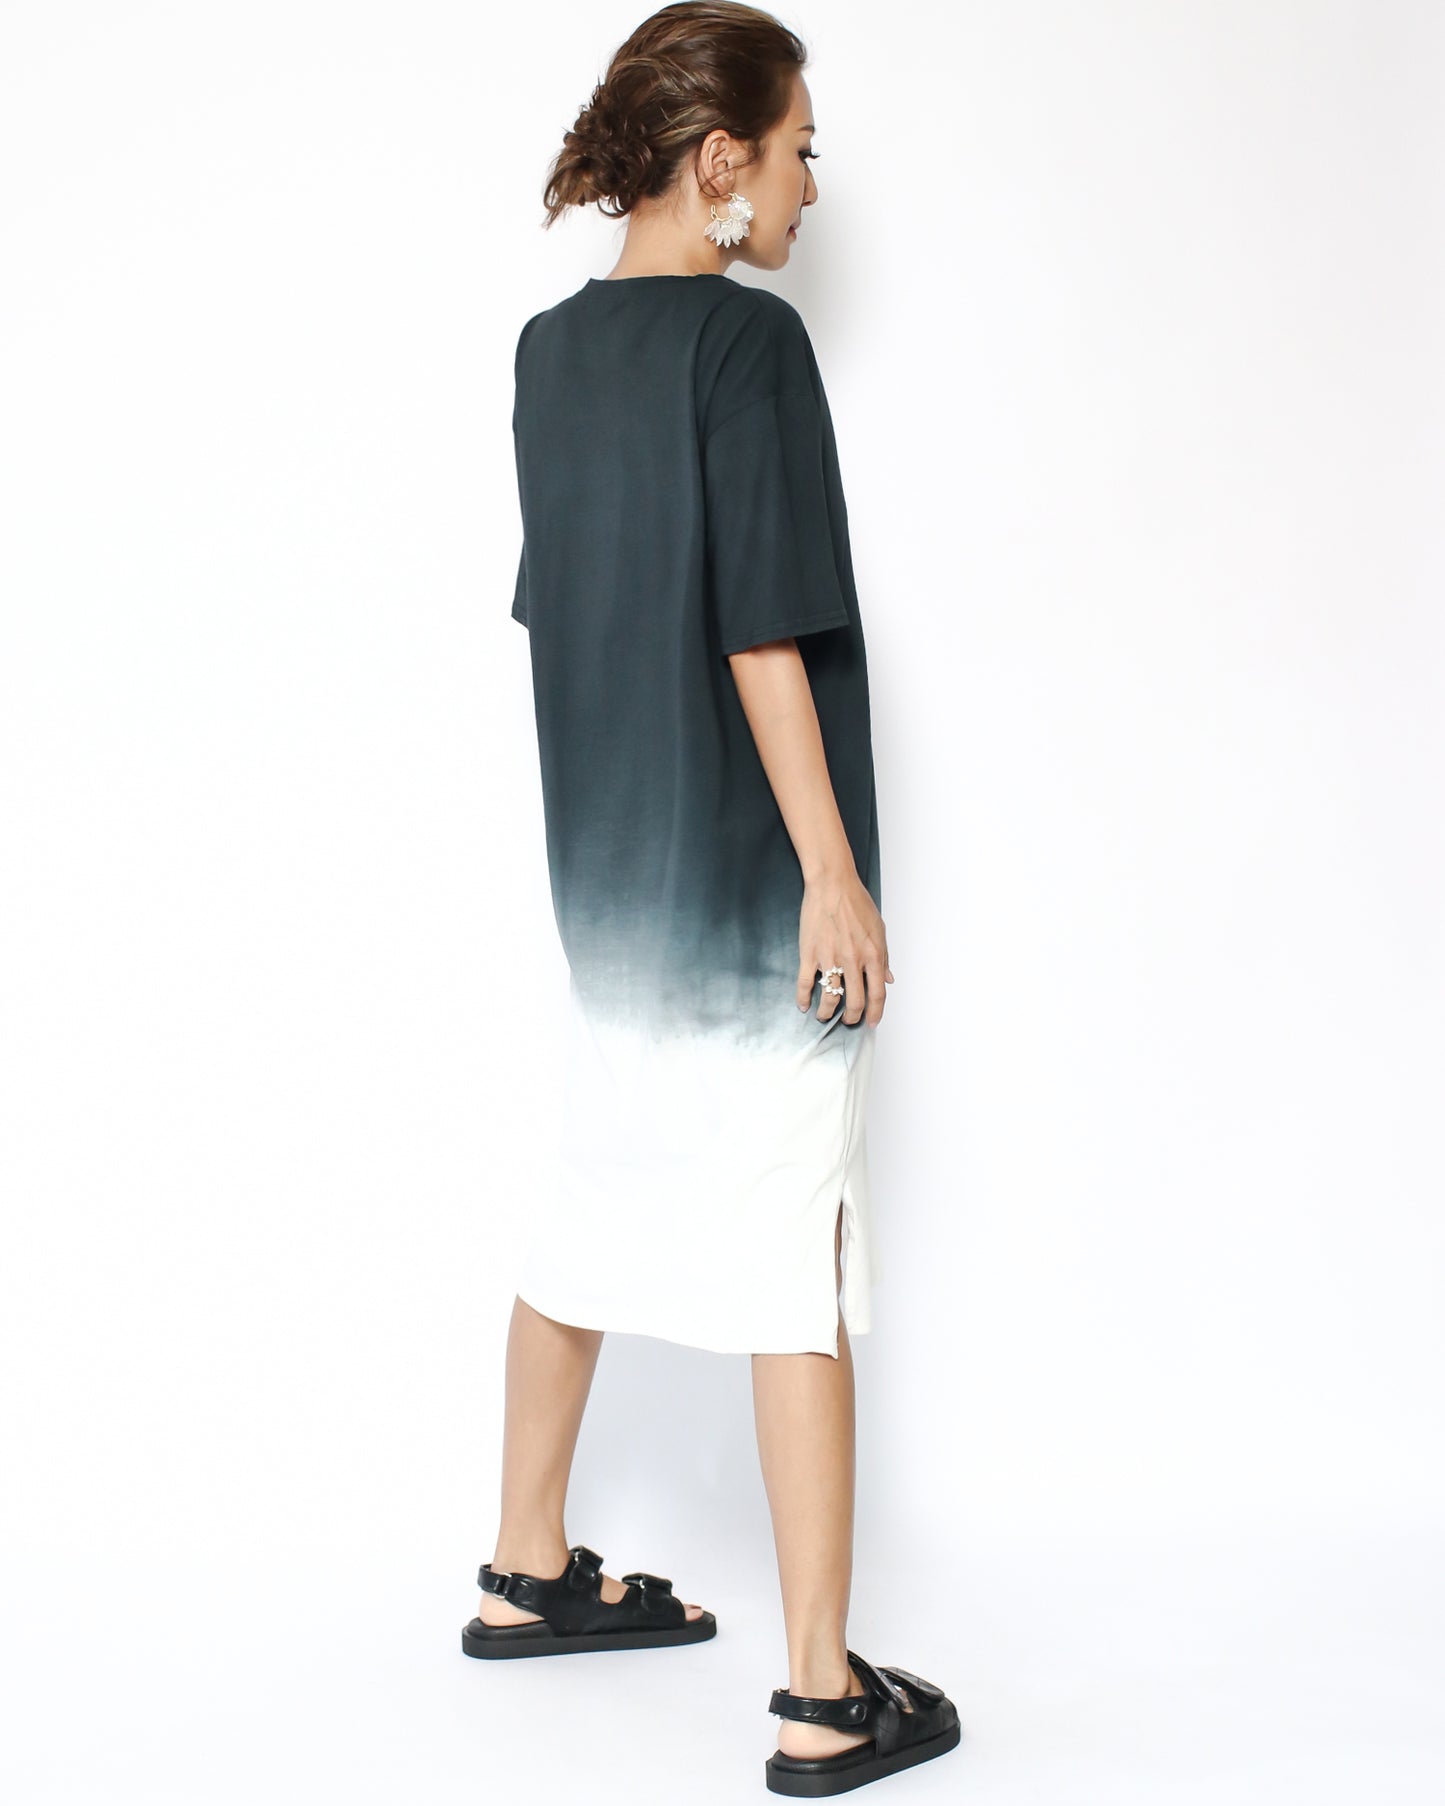 ink ombre midi length tee dress *pre-order*